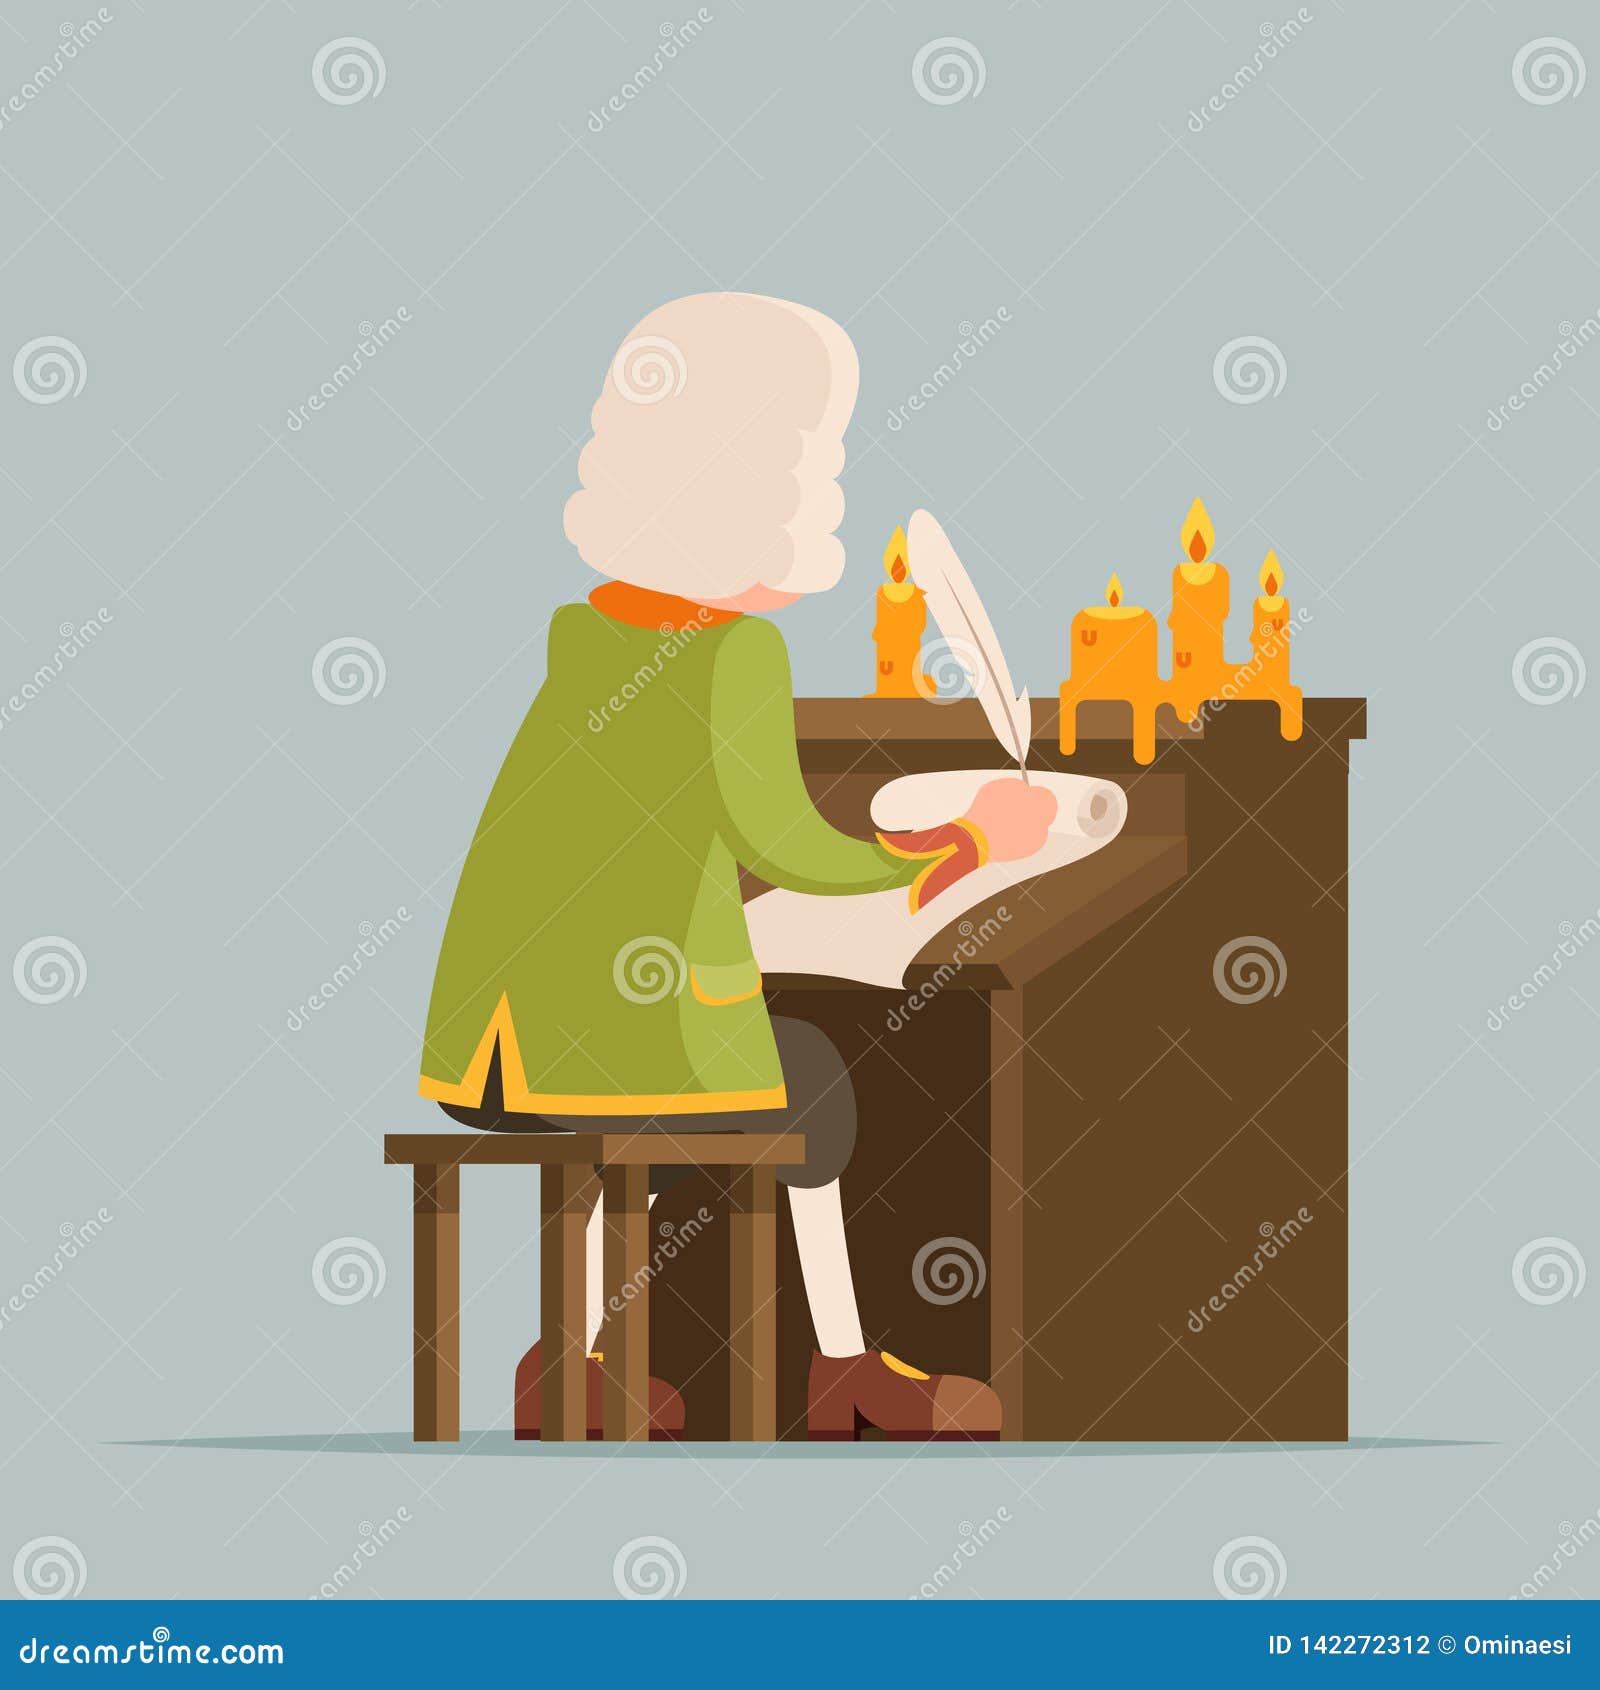 back chronicler noble writer scribe playwright medieval aristocrat periwig pen music stand scroll candles mascot cartoon